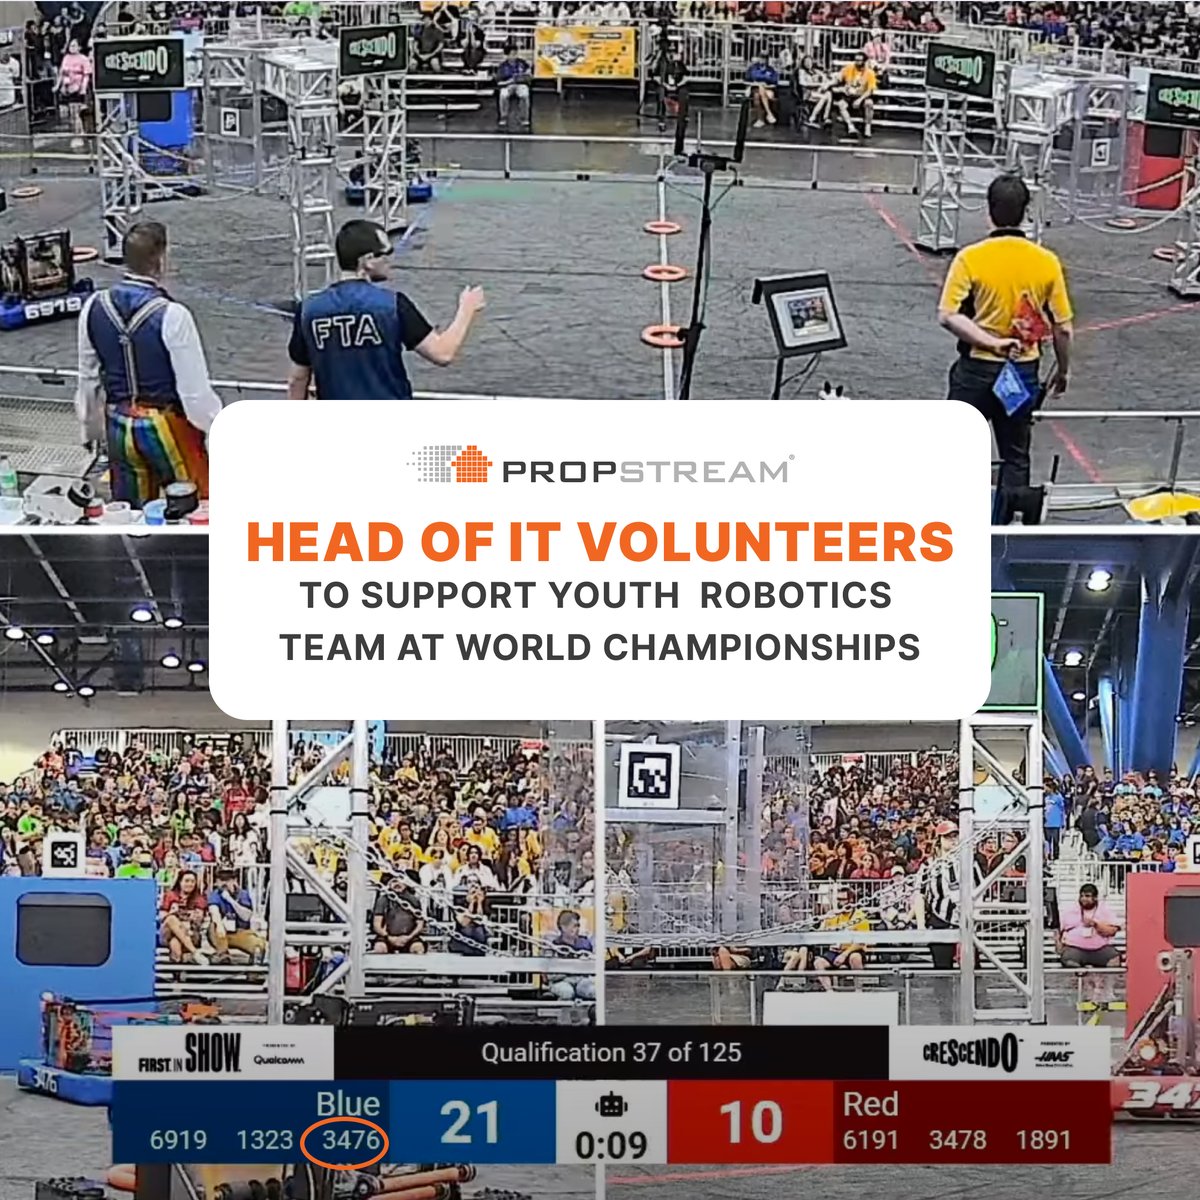 Good luck to team ‘Code Orange’ at the FIRST Championship, an international youth robotics competition. We love to see #PropStreamers contributing positively to the community in innovative ways. #PropStreamcommunity #innovate #tech